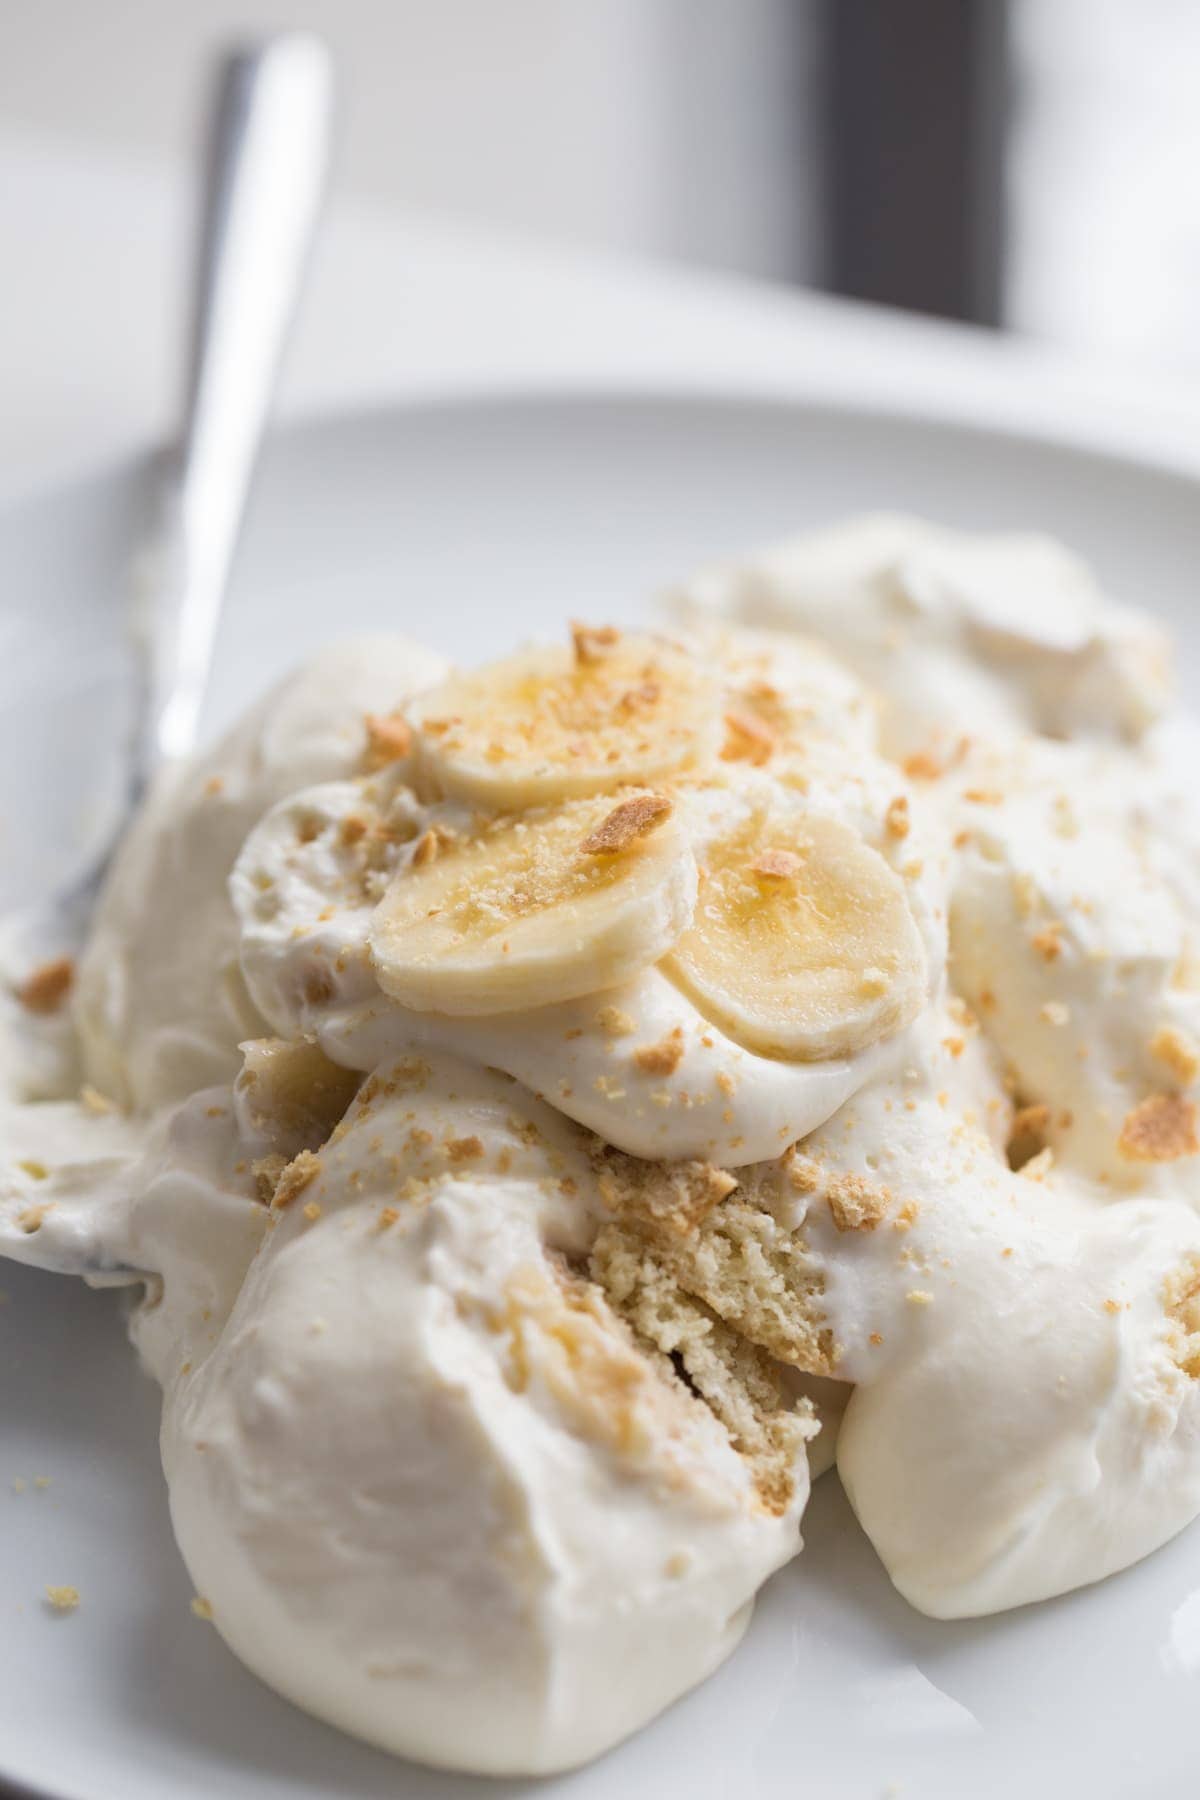 Banana pudding on white plate with spoon